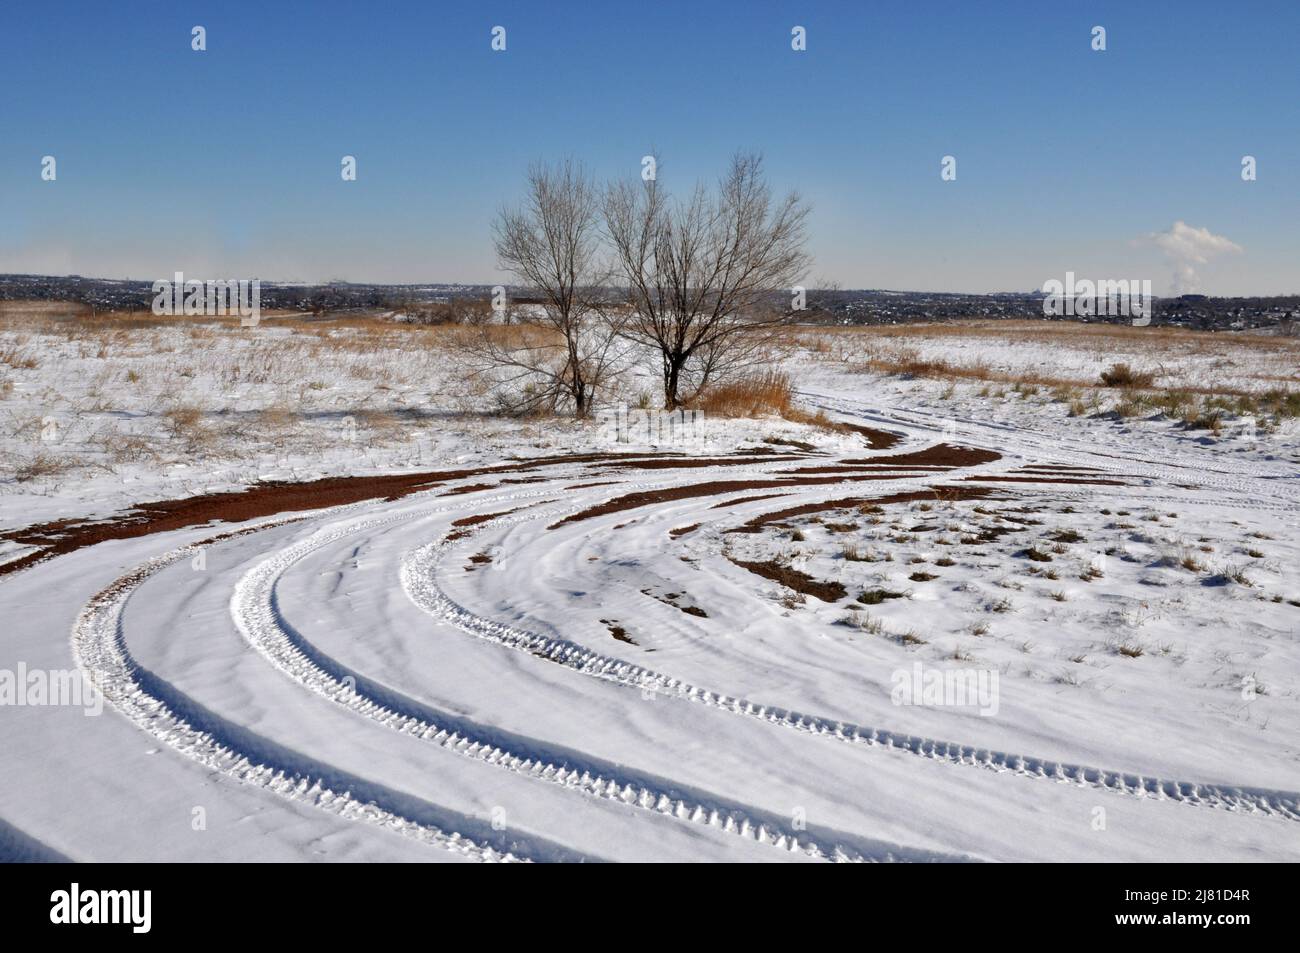 Winter landscape with vehicle tracks in snow Stock Photo